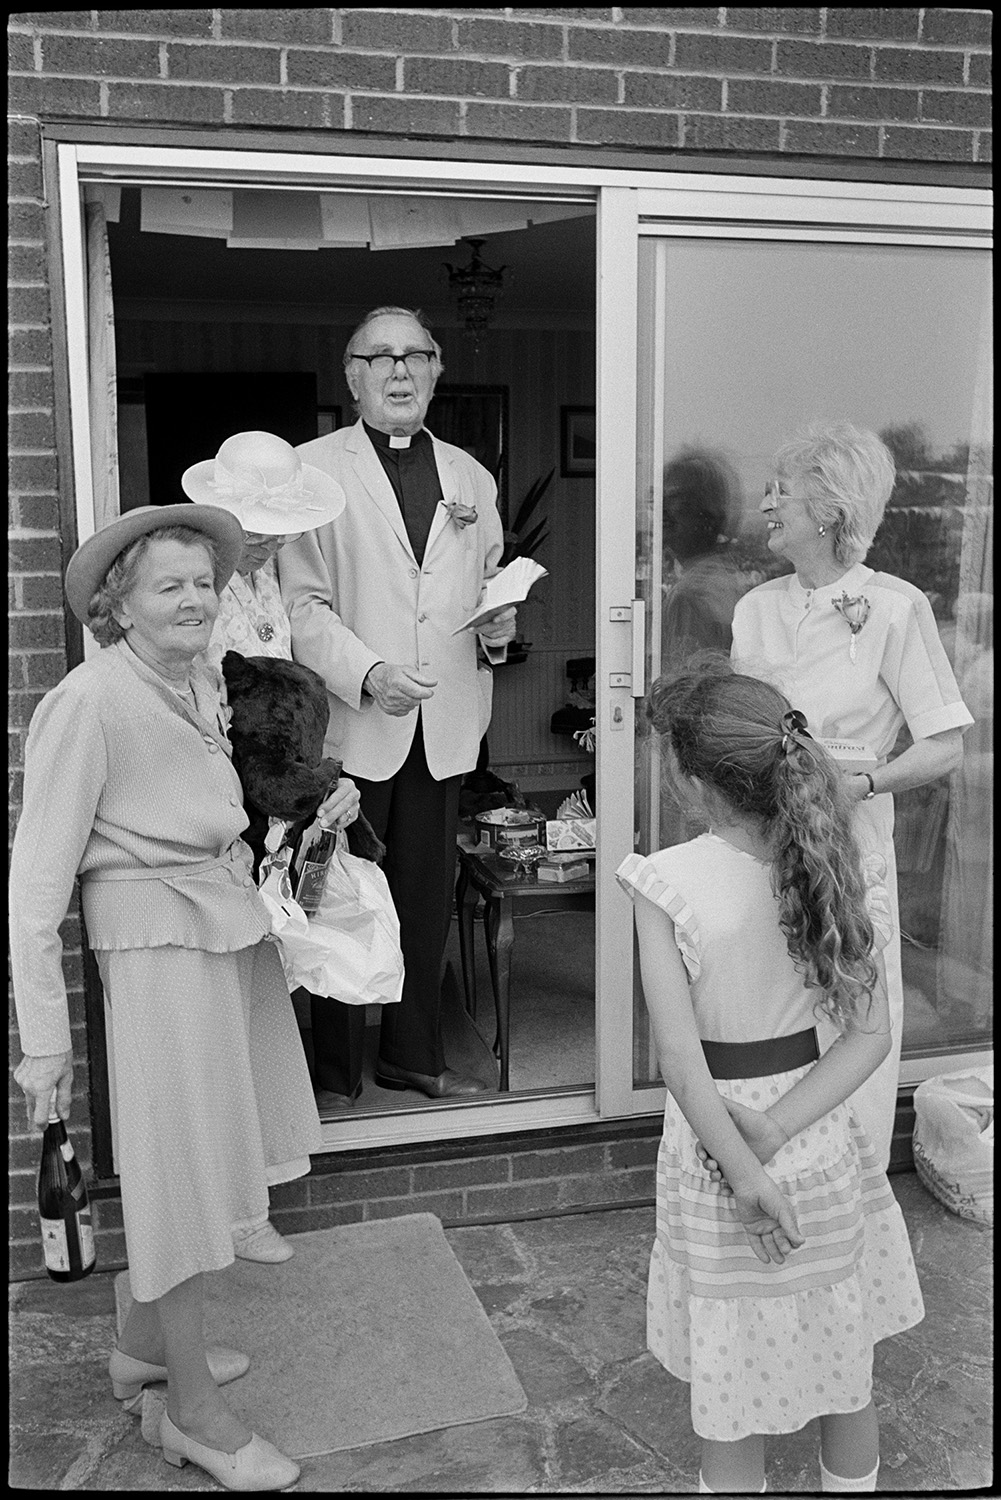 Church fete in garden, stalls, cakes, vicar making speech, thatched pavilion.
[Reverend Richards of Chulmleigh is holding a notebook at the patio door of a house during a church garden fete, at Cricket Close, Chulmleigh. There is a young girl with a ponytail, and three women holding raffle prizes, including a stuffed toy and bottles of wine.]